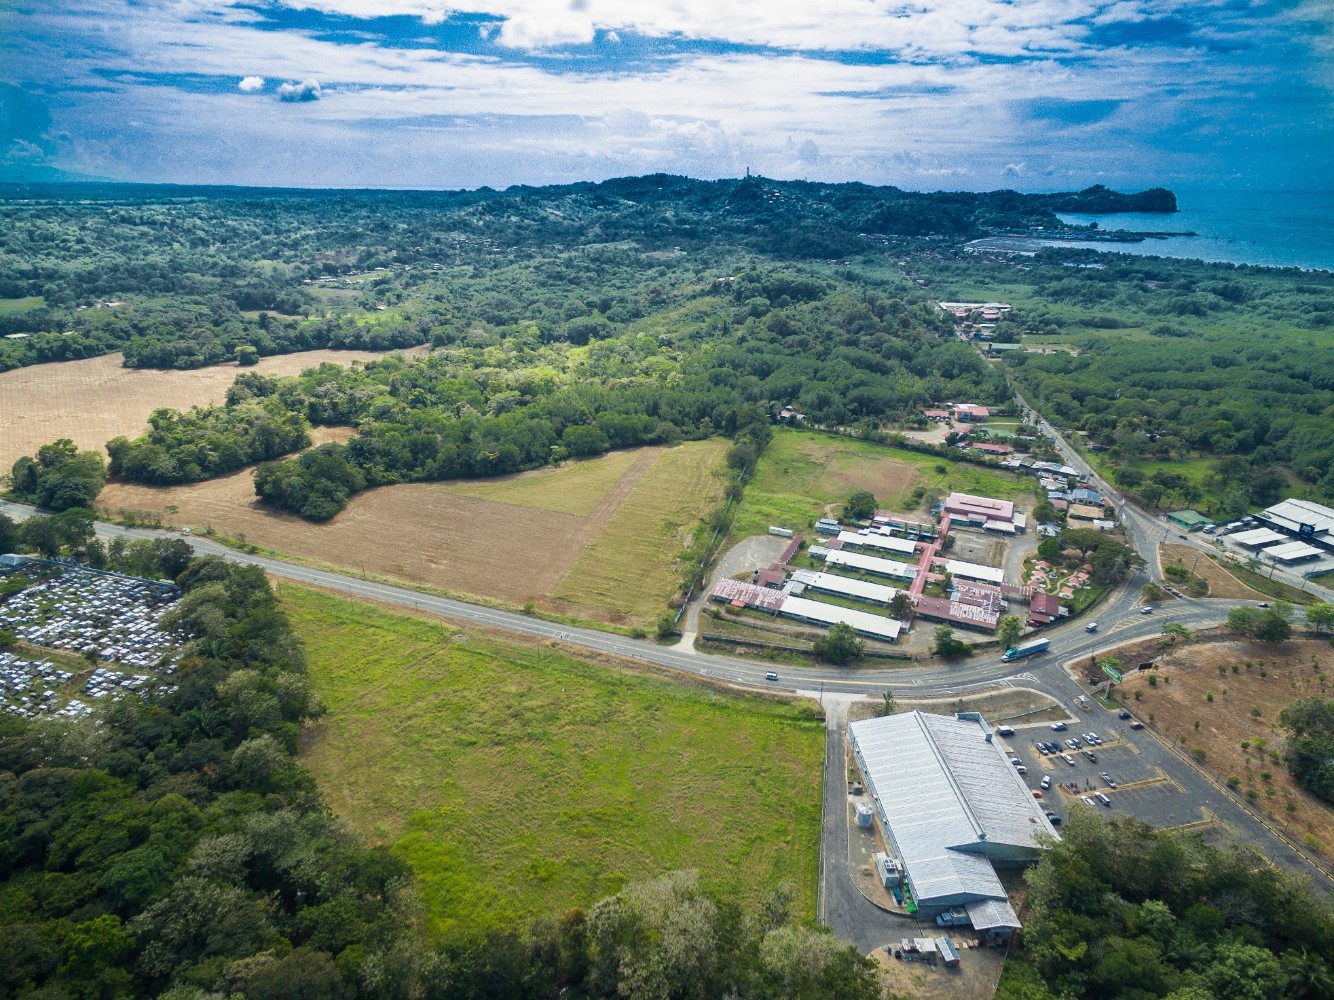 5 ACRES - Perfectly Flat And Usable Commercial Property Right On The Highway Minutes From Manuel Antonio And Quepos!!!!